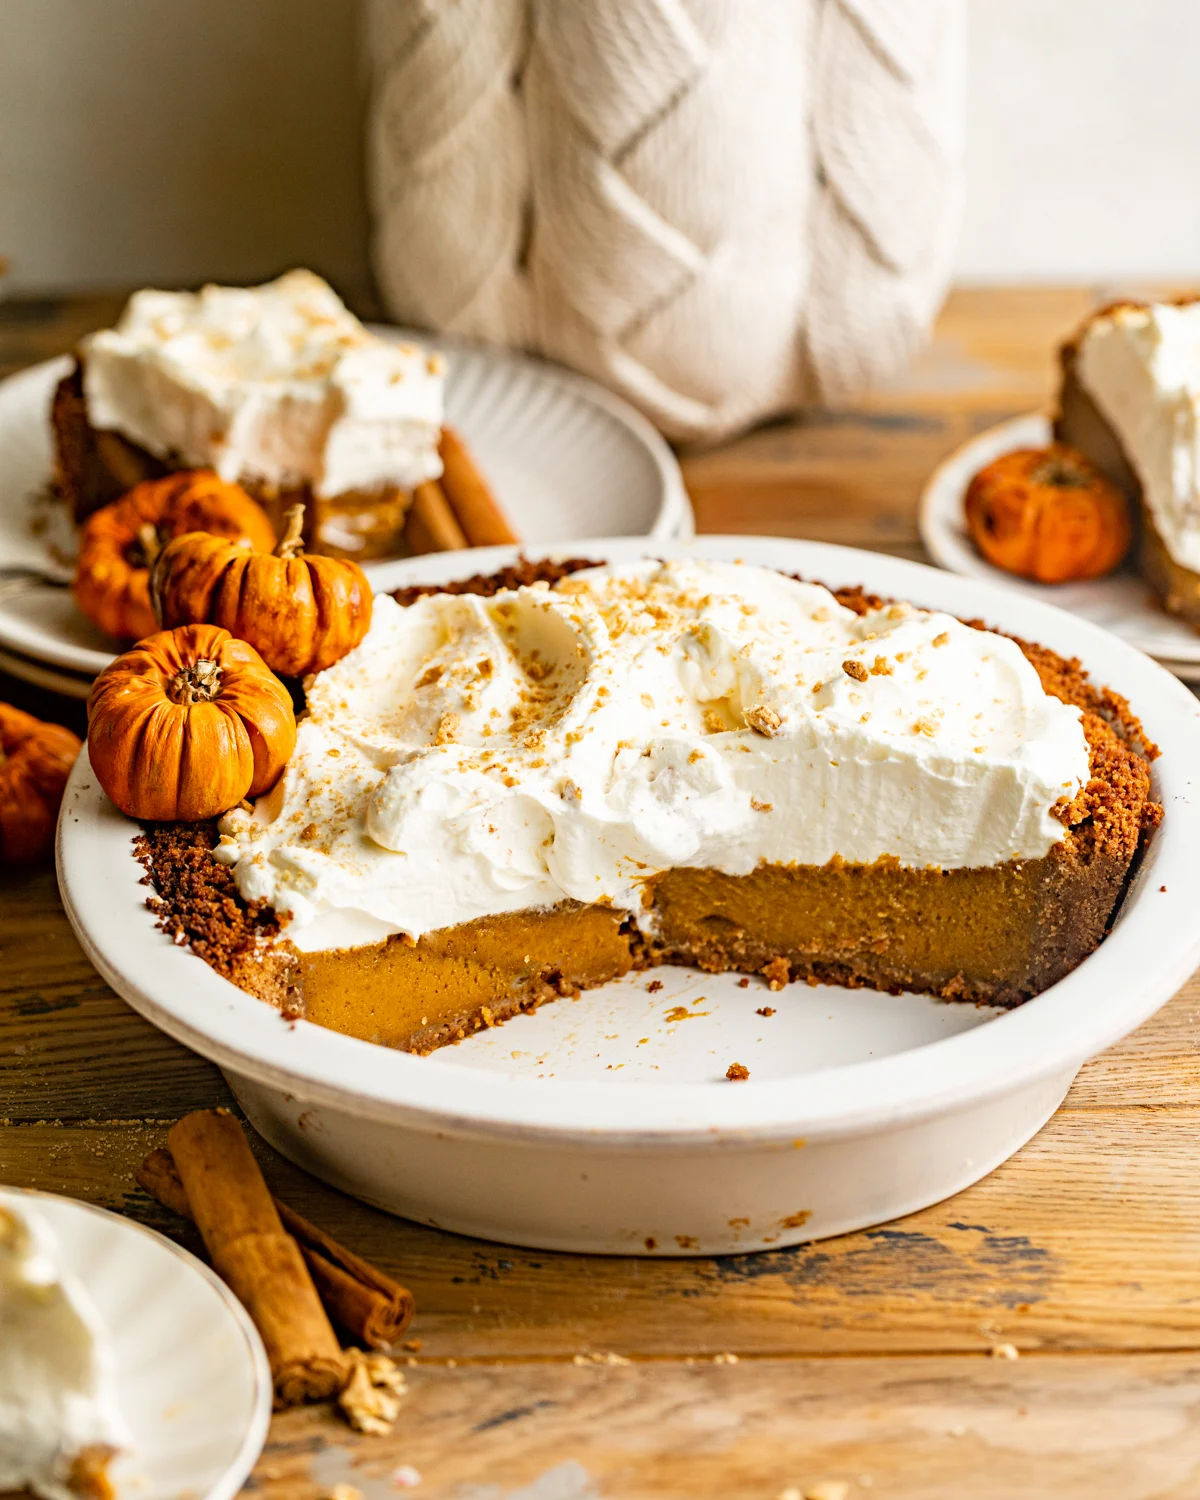 Pumpkin pie in a white baking dish topped with whipped cream.